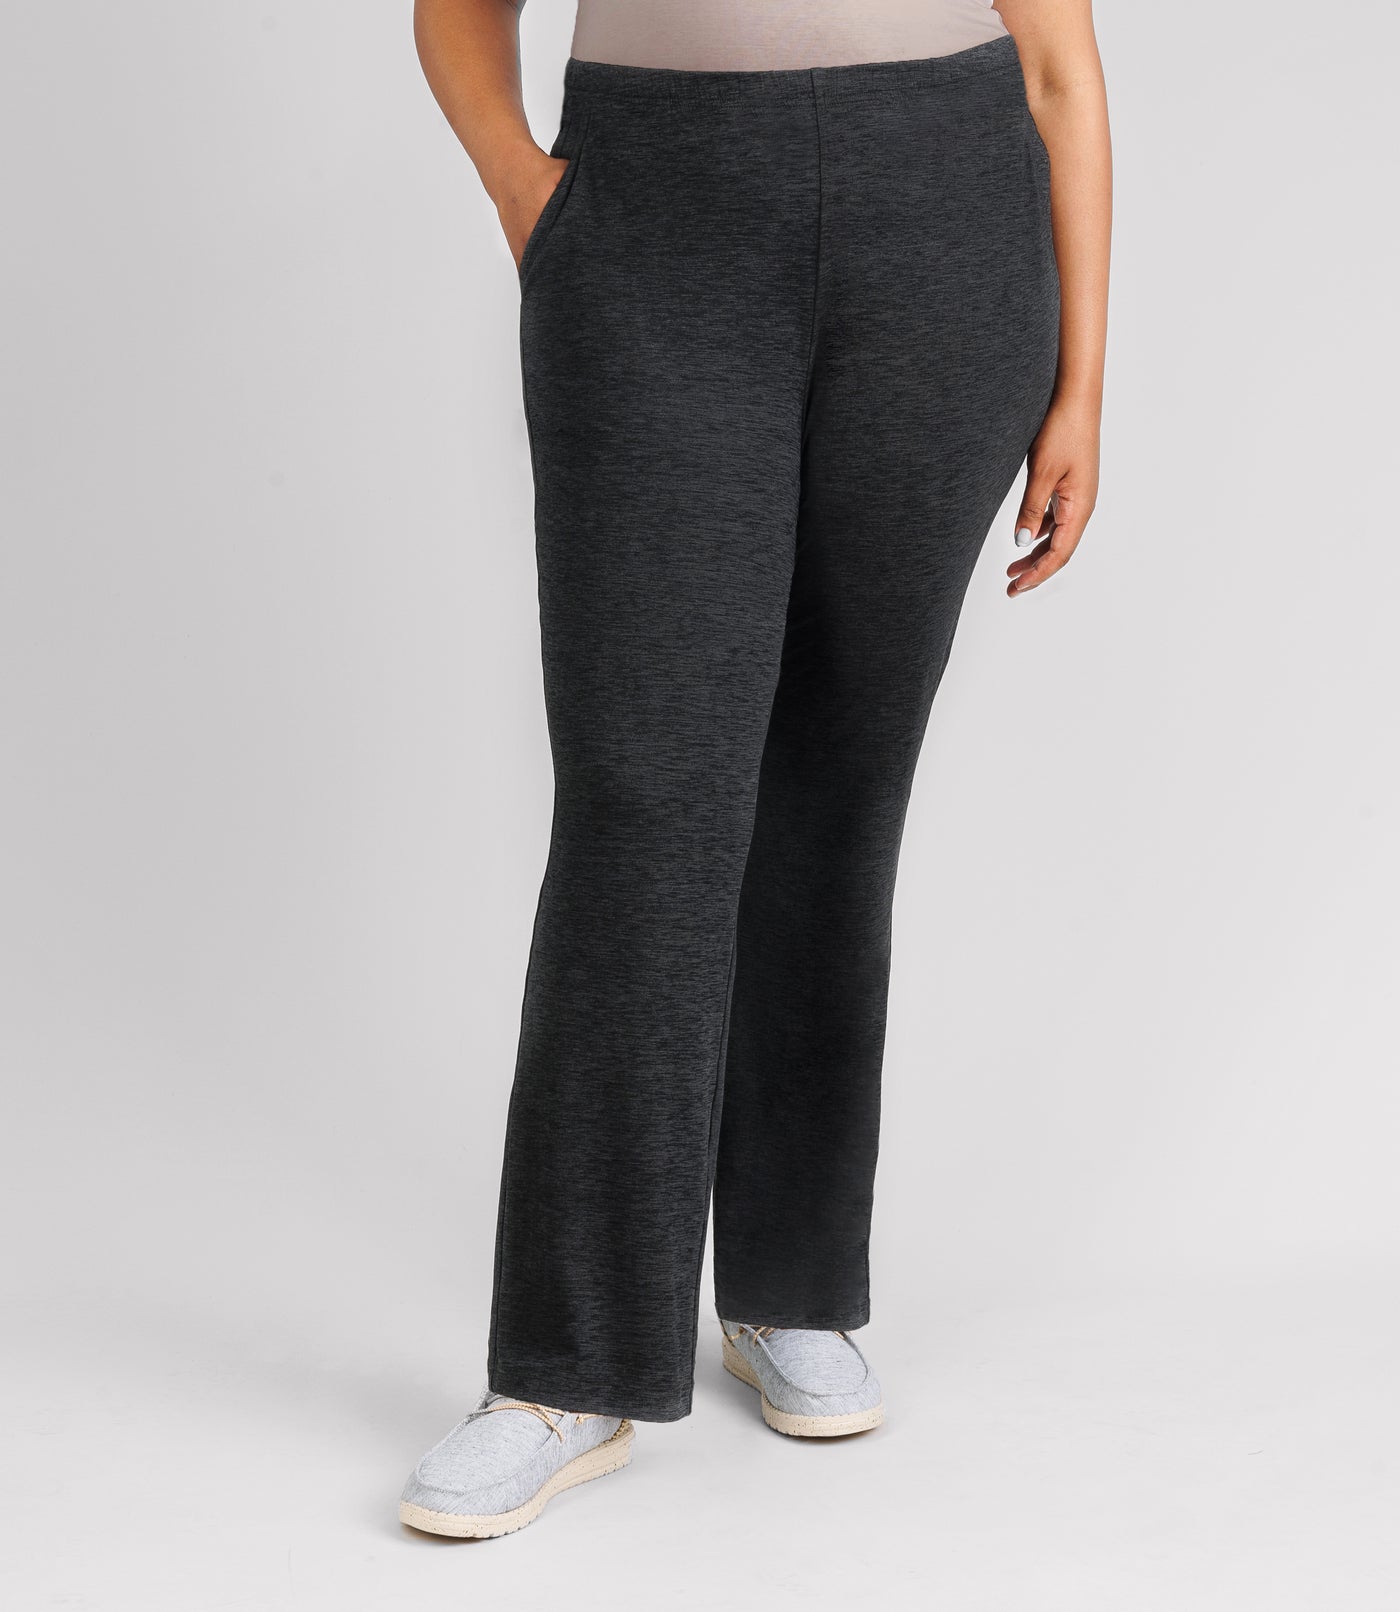 JunoActive model wearing SoftSupreme pocketed lounge pant in color heather black. Her right hand is in her right pocket and left arm dropping by left side.